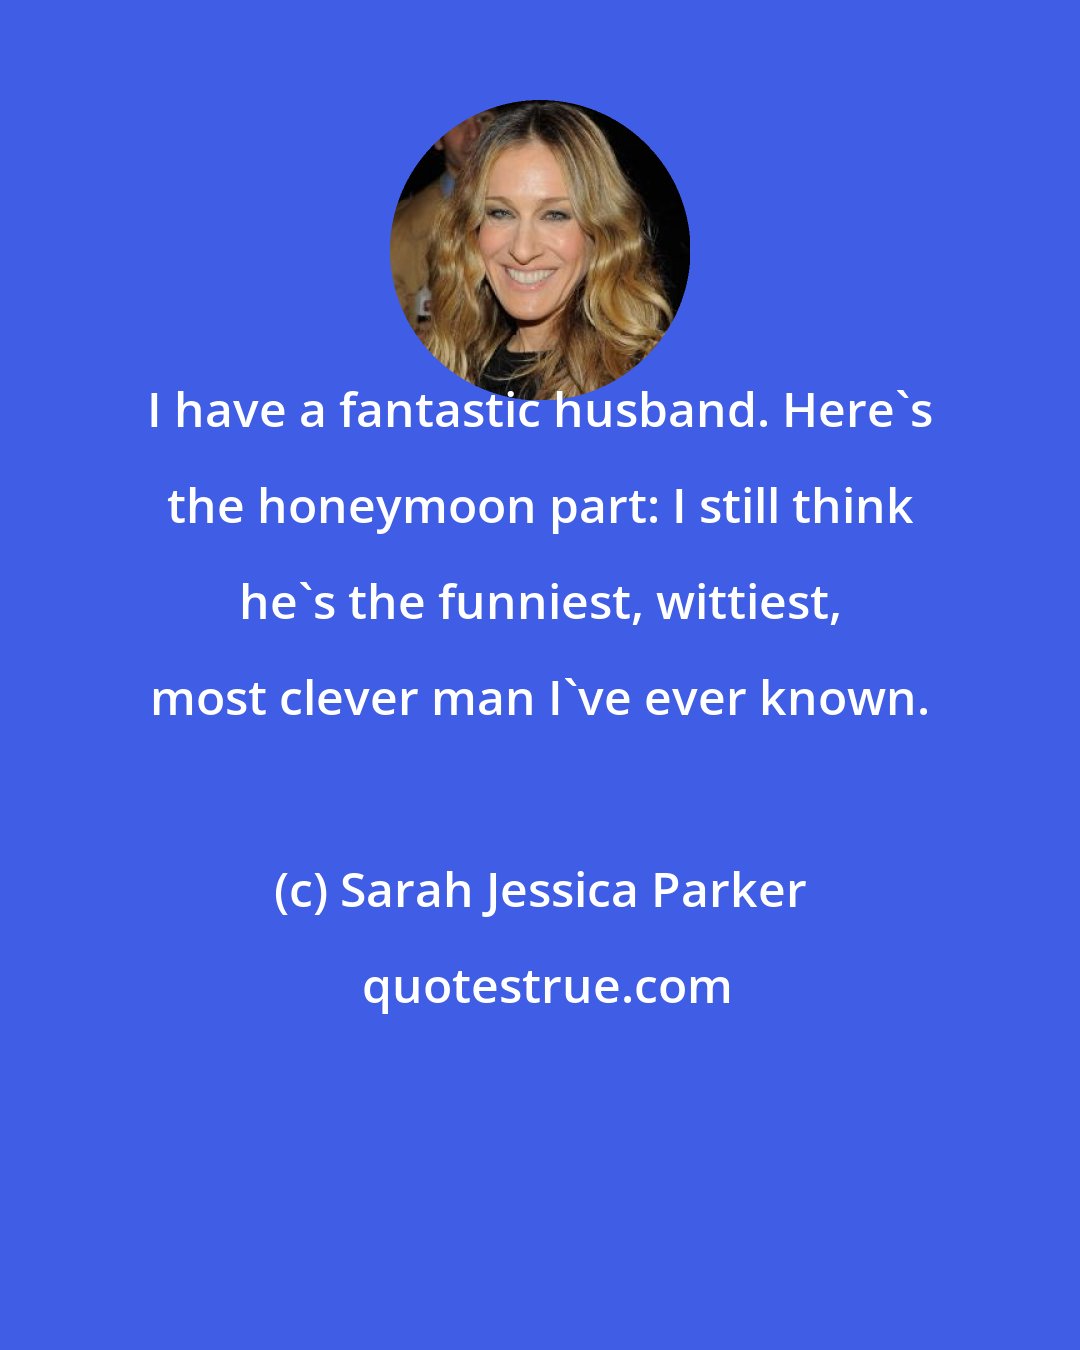 Sarah Jessica Parker: I have a fantastic husband. Here's the honeymoon part: I still think he's the funniest, wittiest, most clever man I've ever known.